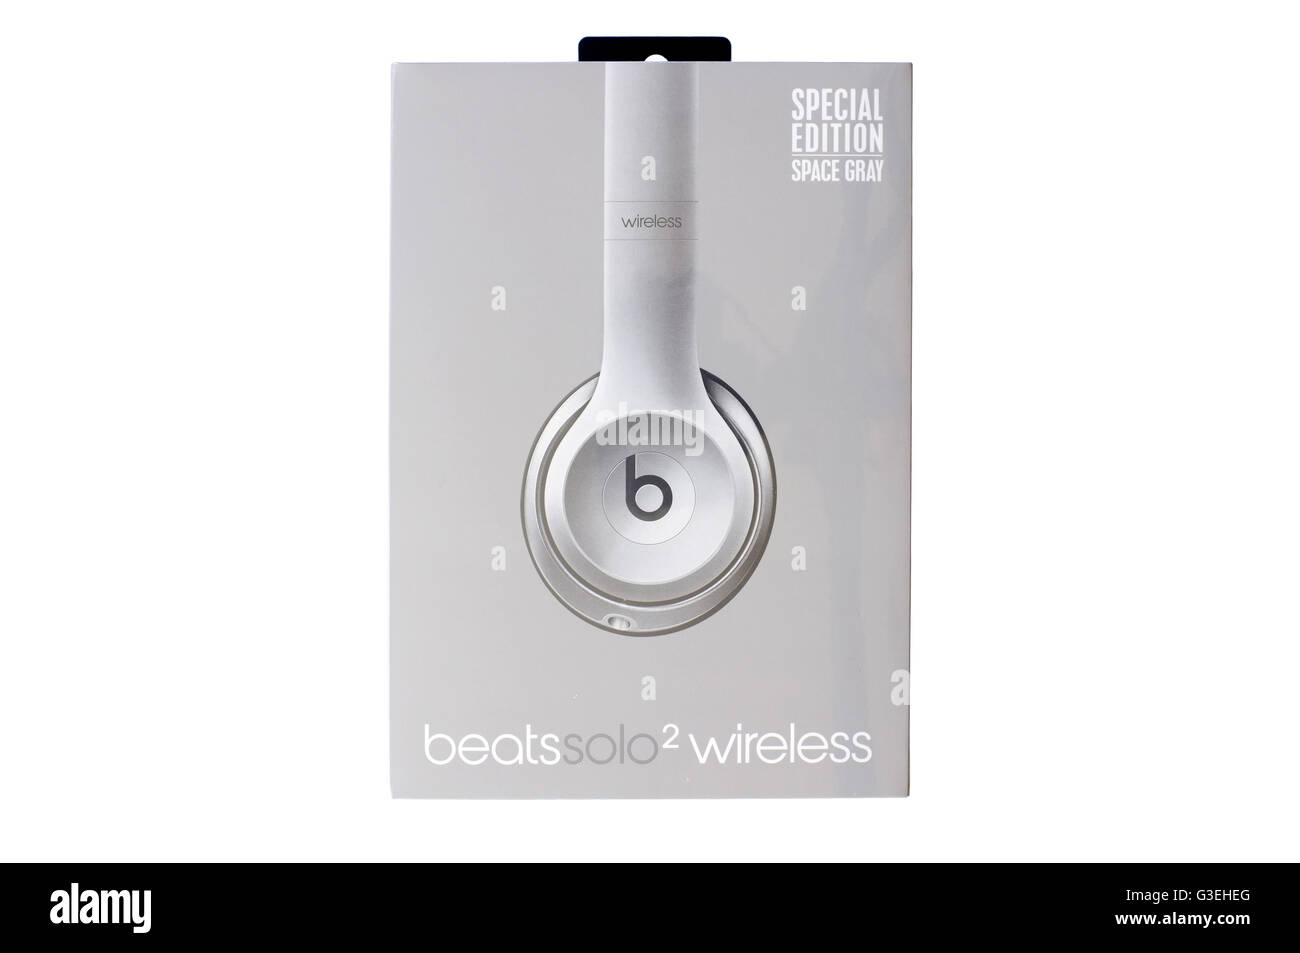 Beats solo 2 stock and images Alamy